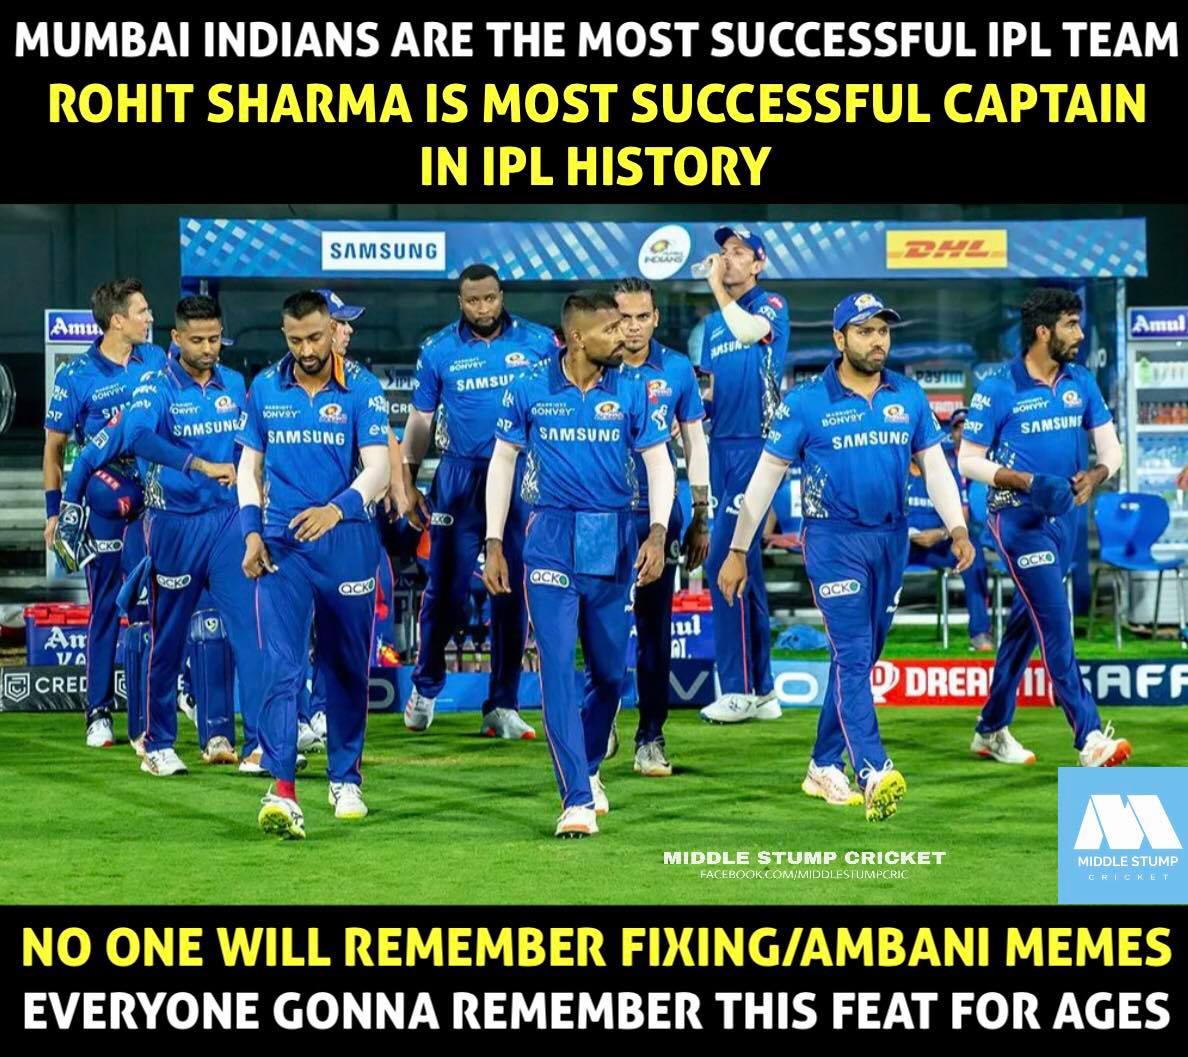 50+ Funny Mumbai Indians Memes That Will Make You Laugh